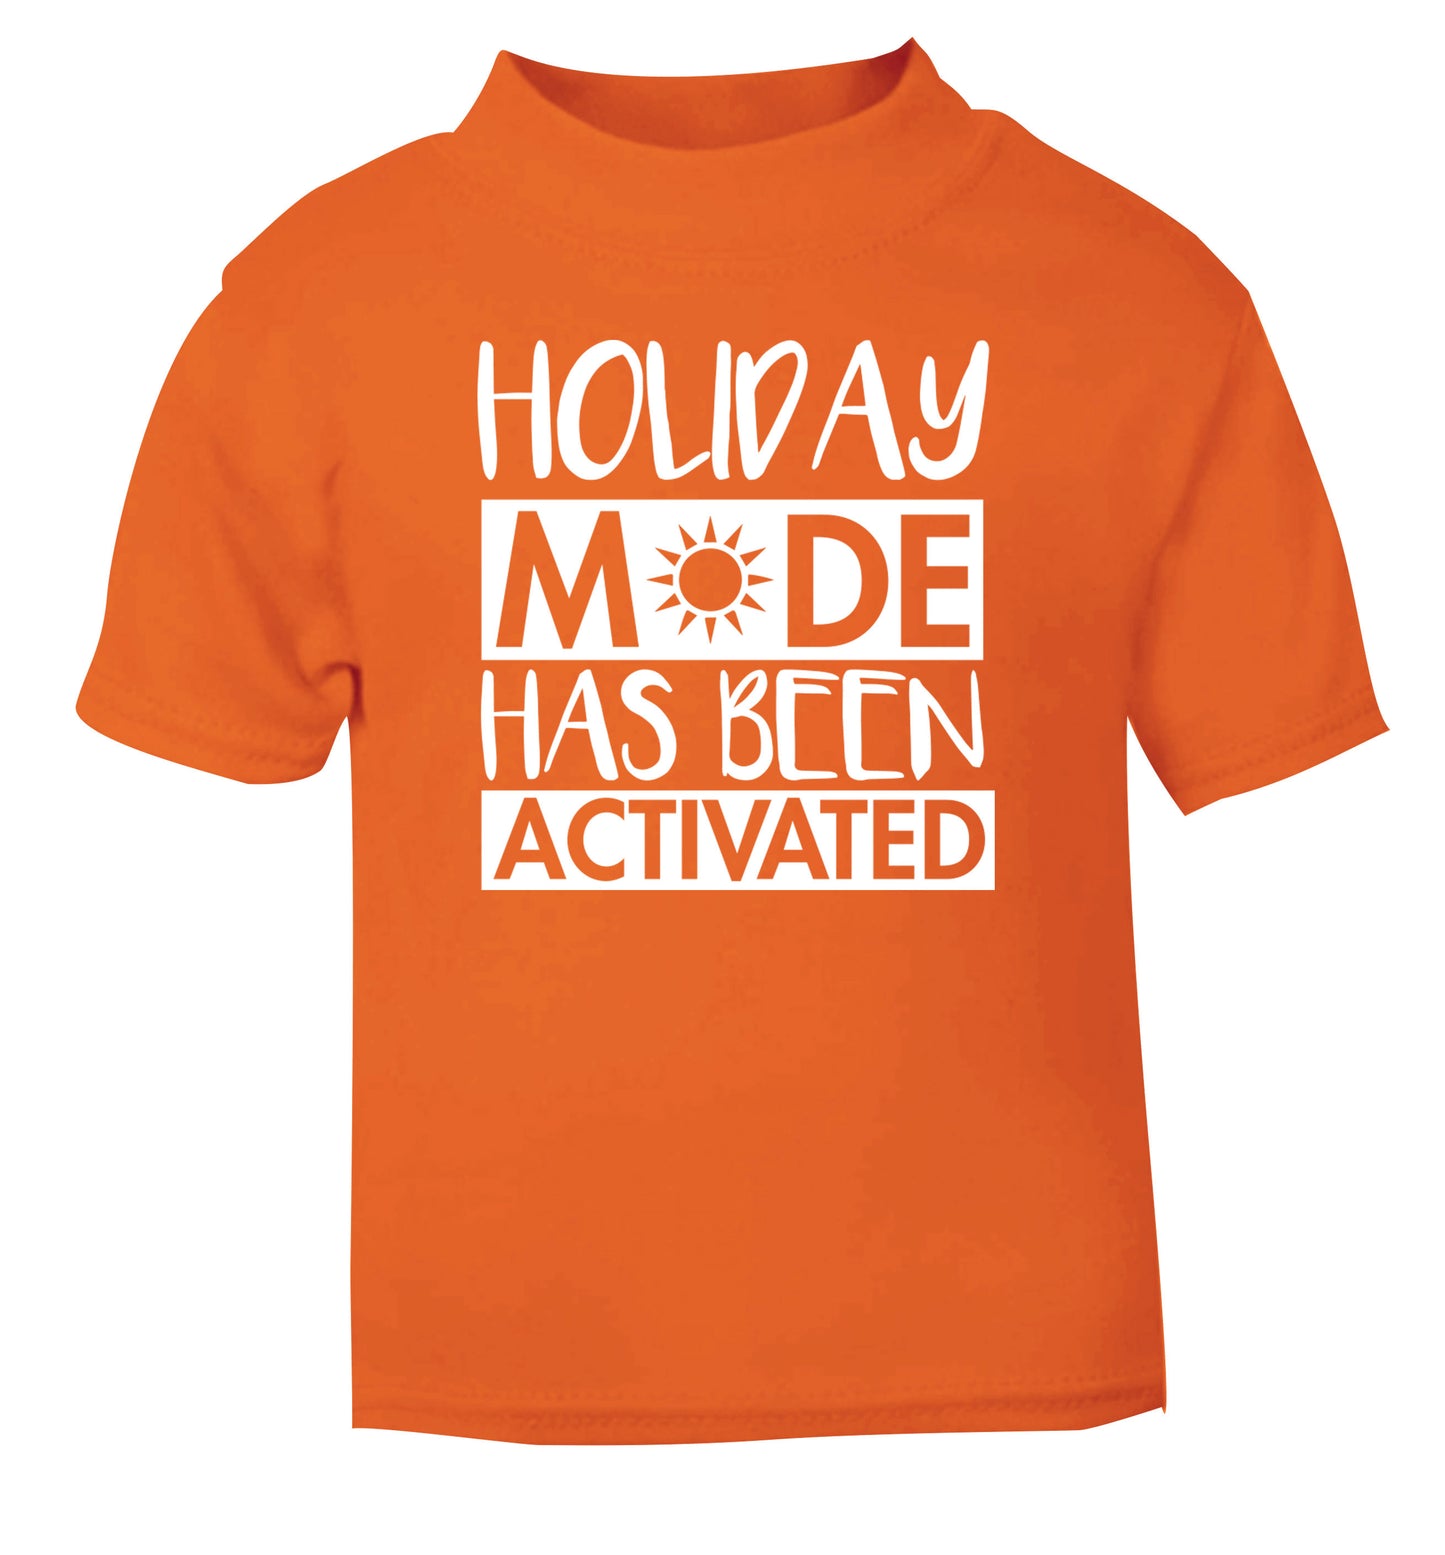 Holiday mode has been activated orange Baby Toddler Tshirt 2 Years